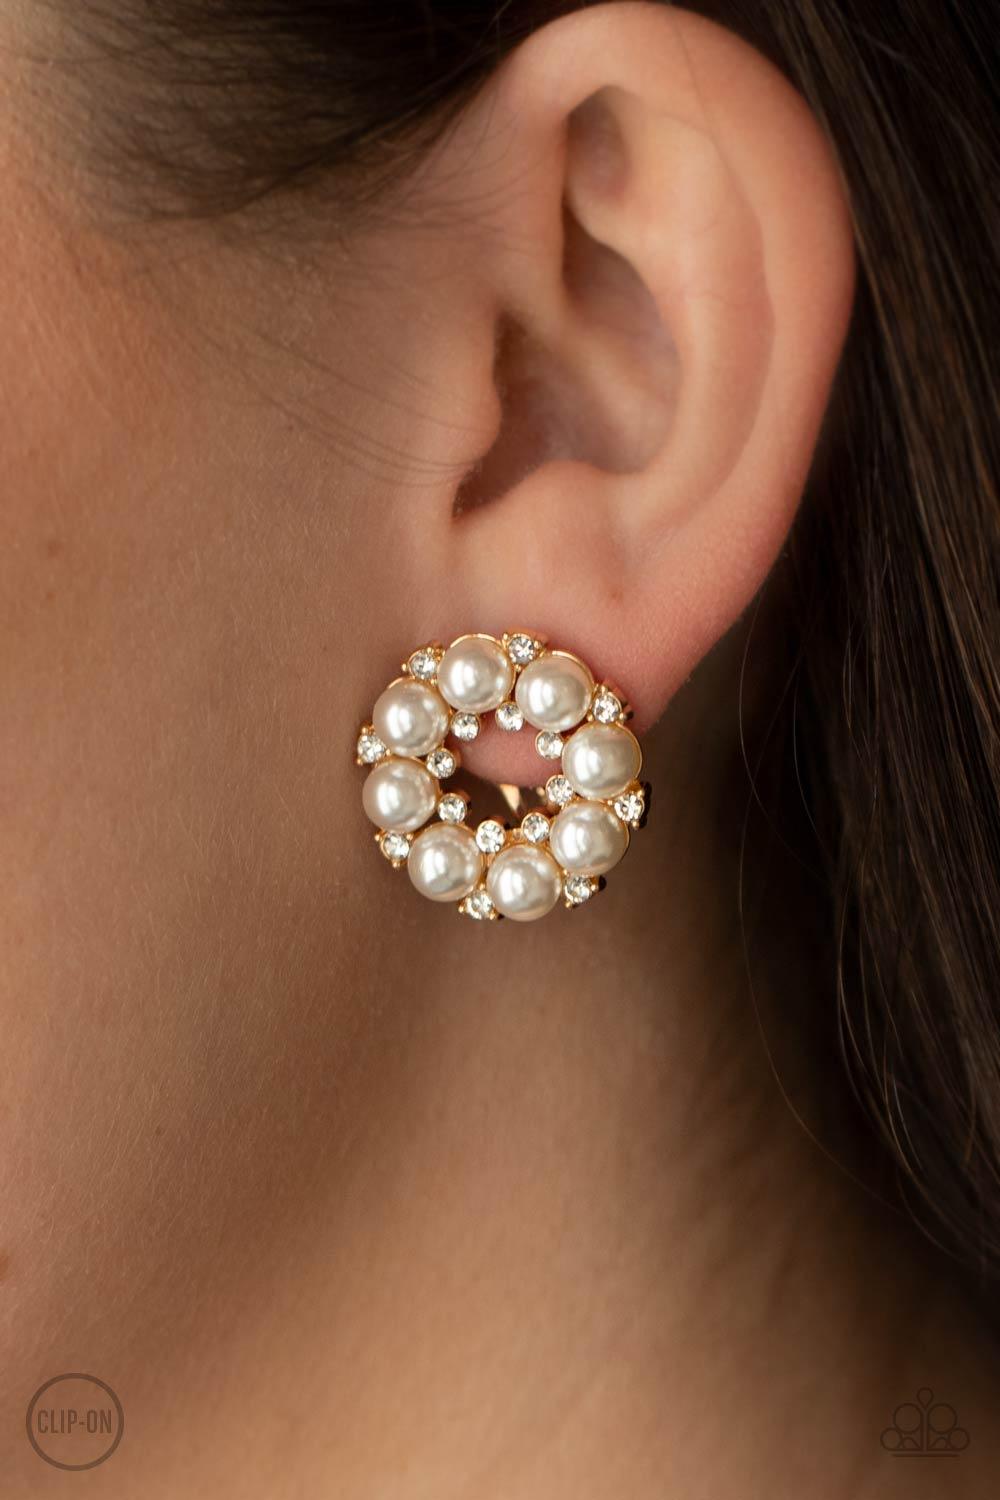 Paparazzi Accessories Roundabout Ritz - Gold *Clip-On A timeless collection of dainty white rhinestones and classic white rhinestones spin into a bubbly hoop. Earring attaches to a standard clip-on fitting. Sold as one pair of clip-on earrings. Jewelry